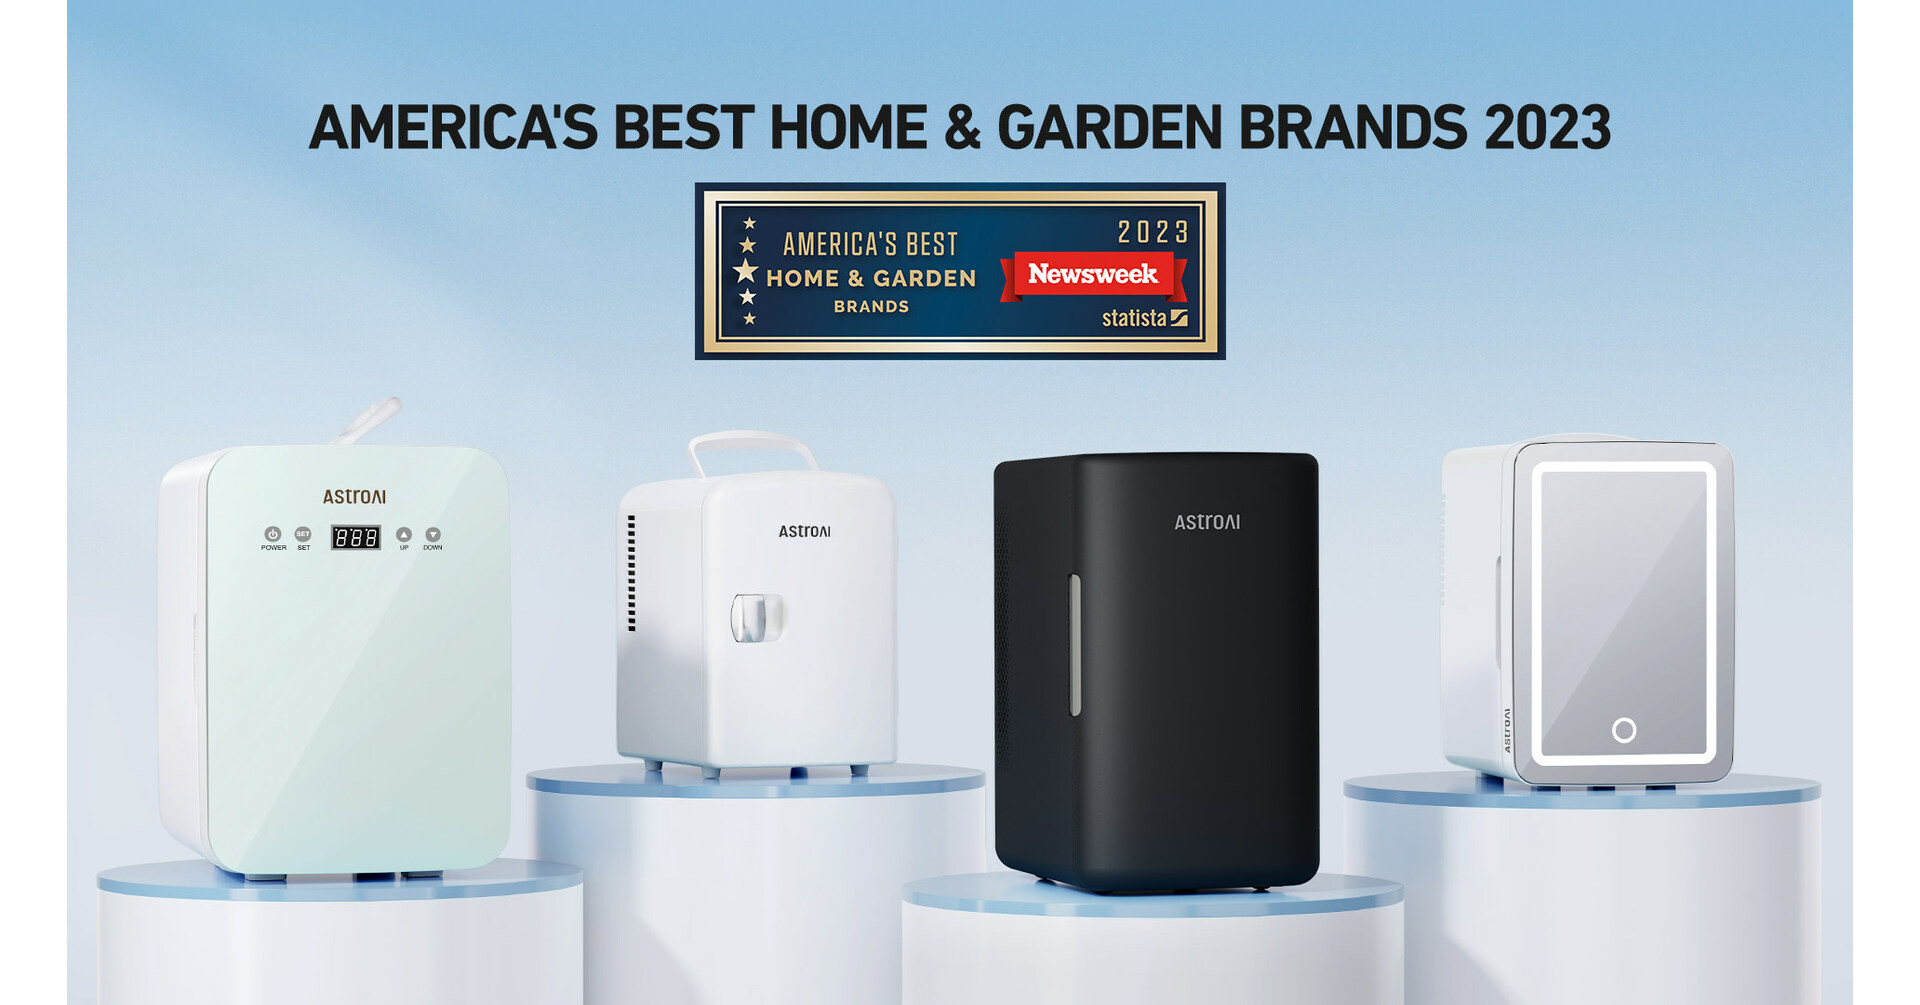 AstroAI Recognized as One of America’s Best Home and Garden Brands 2023 with Its Mini Fridge Lineup